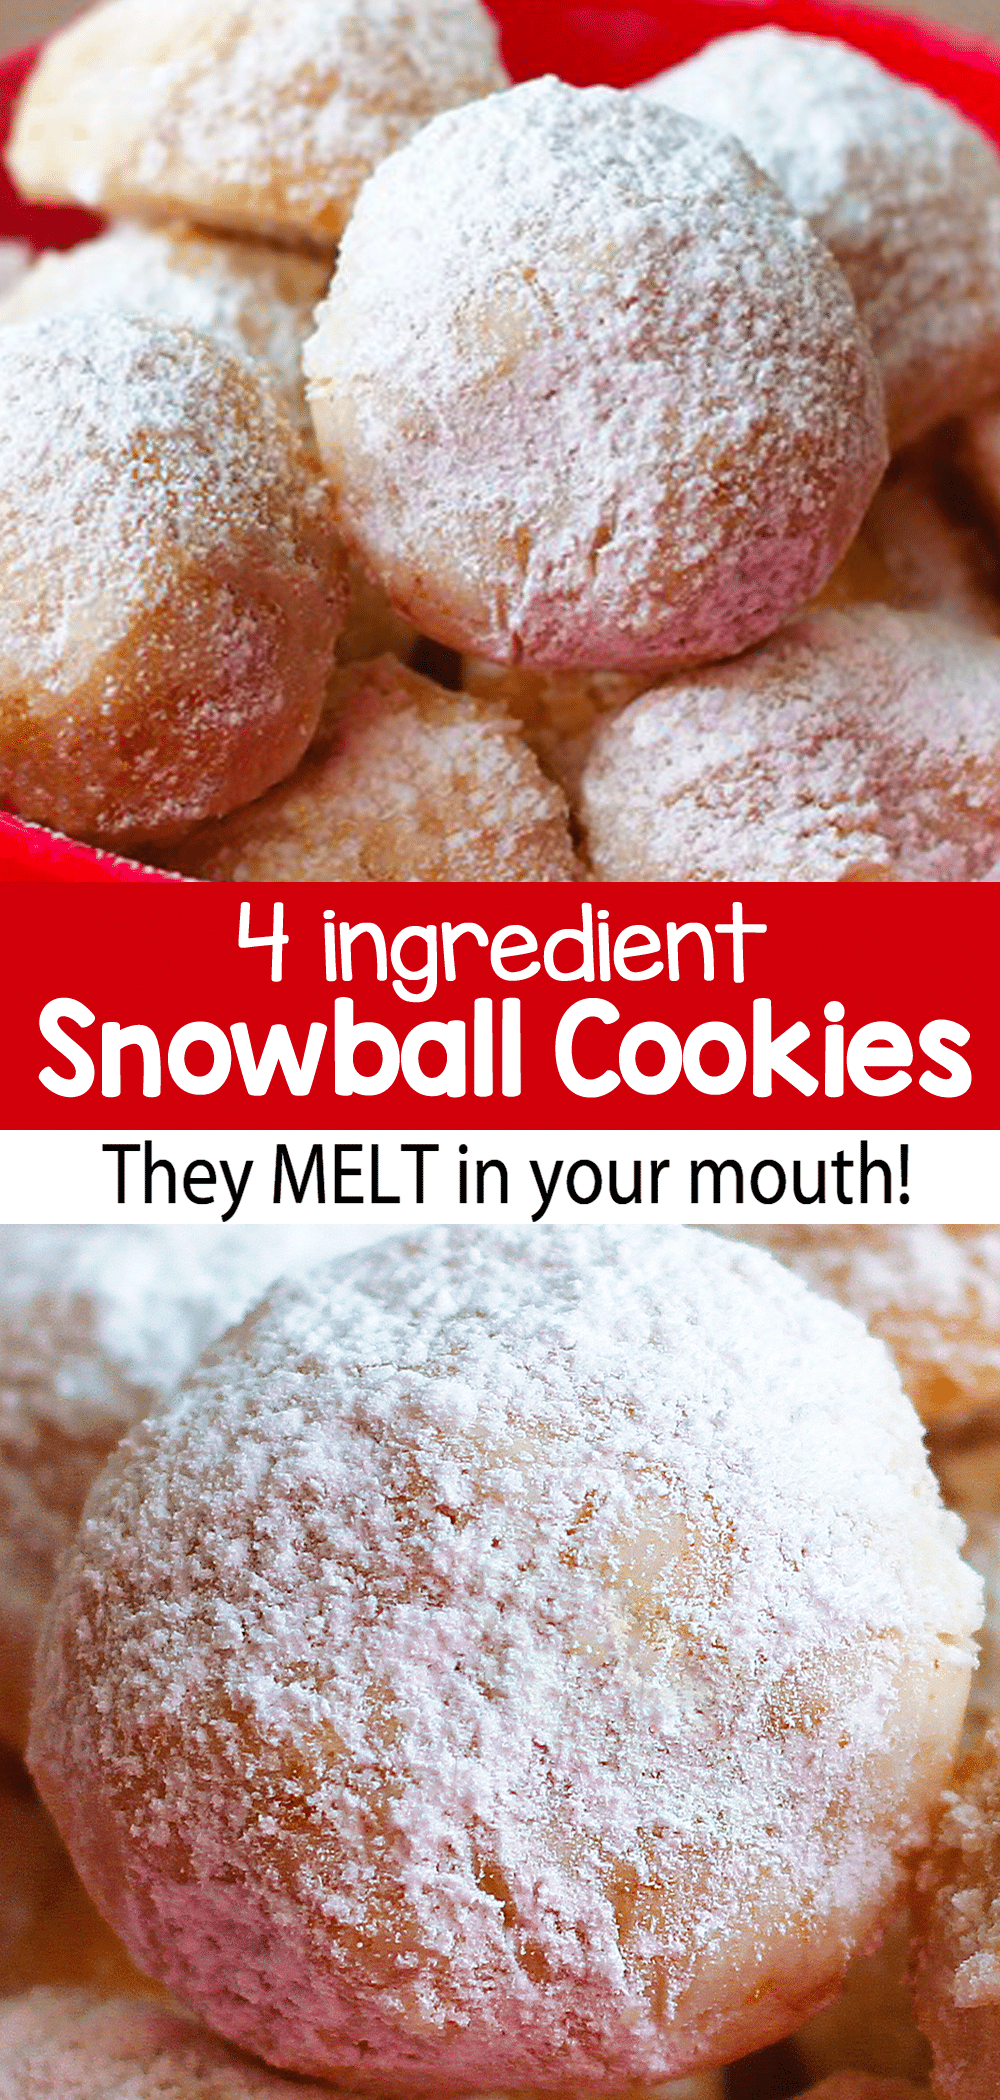 Snowball Cookies That MELT In Your Mouth!